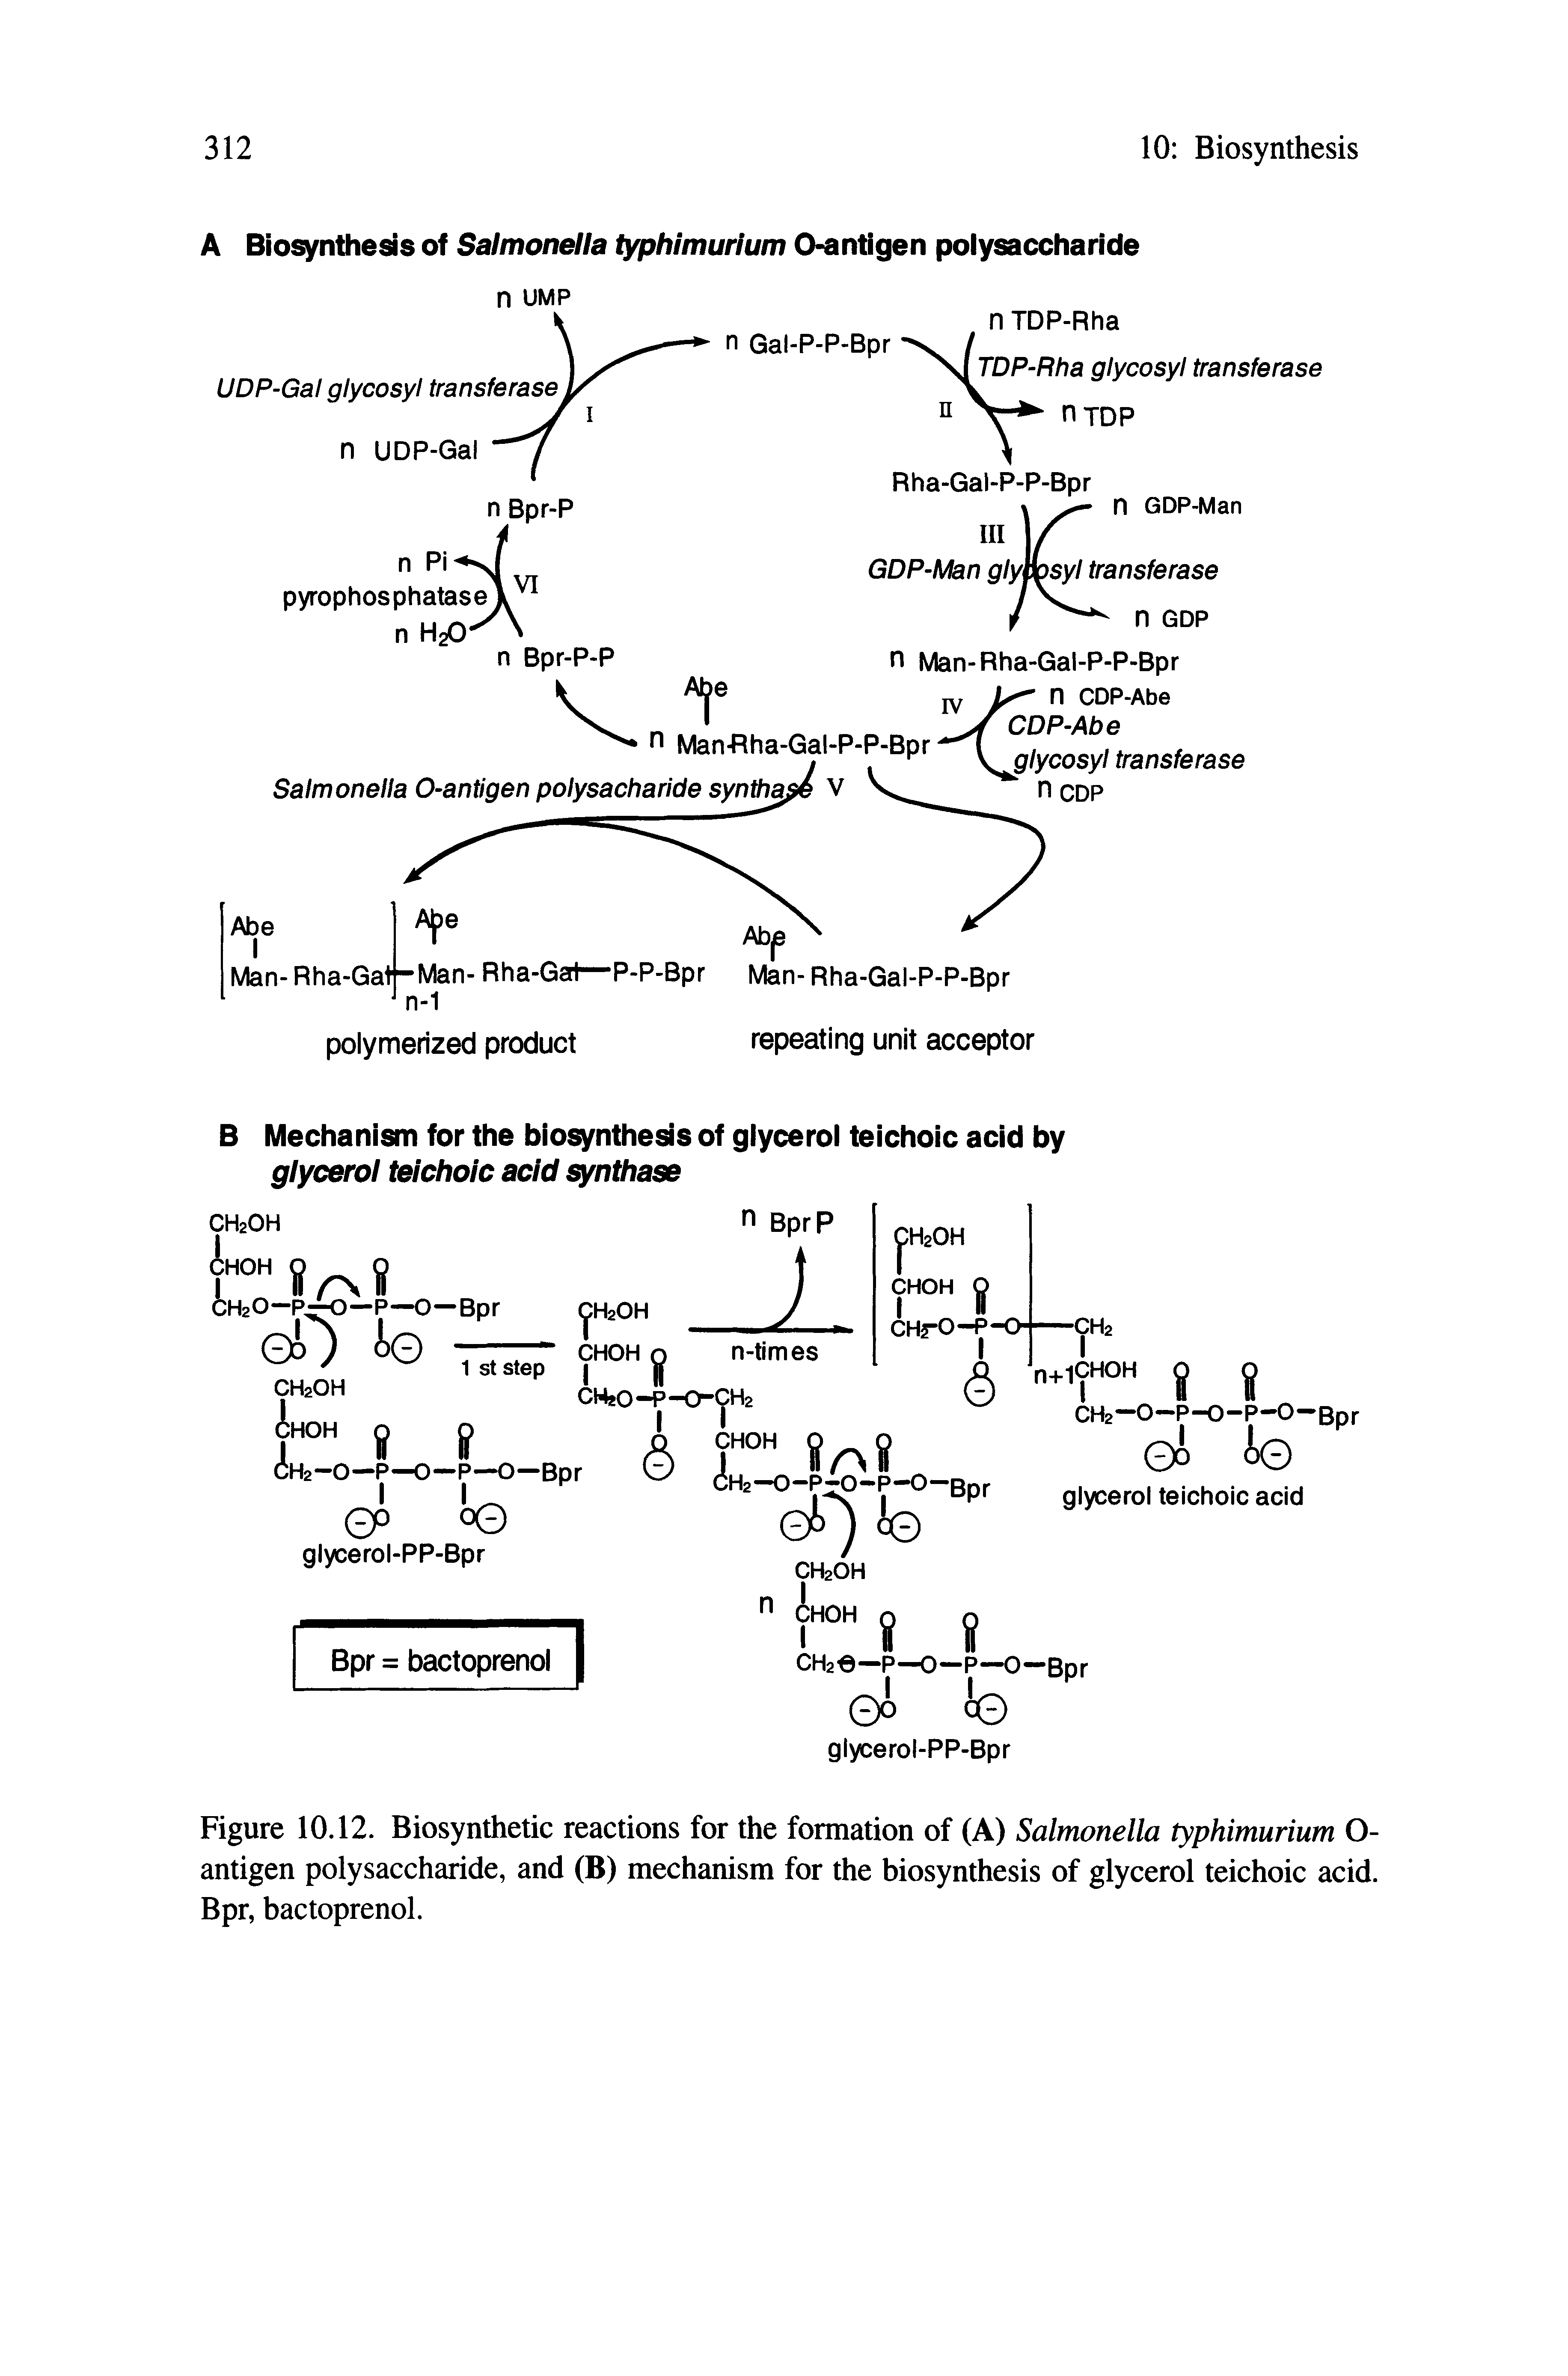 Figure 10.12. Biosynthetic reactions for the formation of (A) Salmonella typhimurlum O-antigen polysaccharide, and (B) mechanism for the biosynthesis of glycerol teichoic acid. Bpr, bactoprenol.